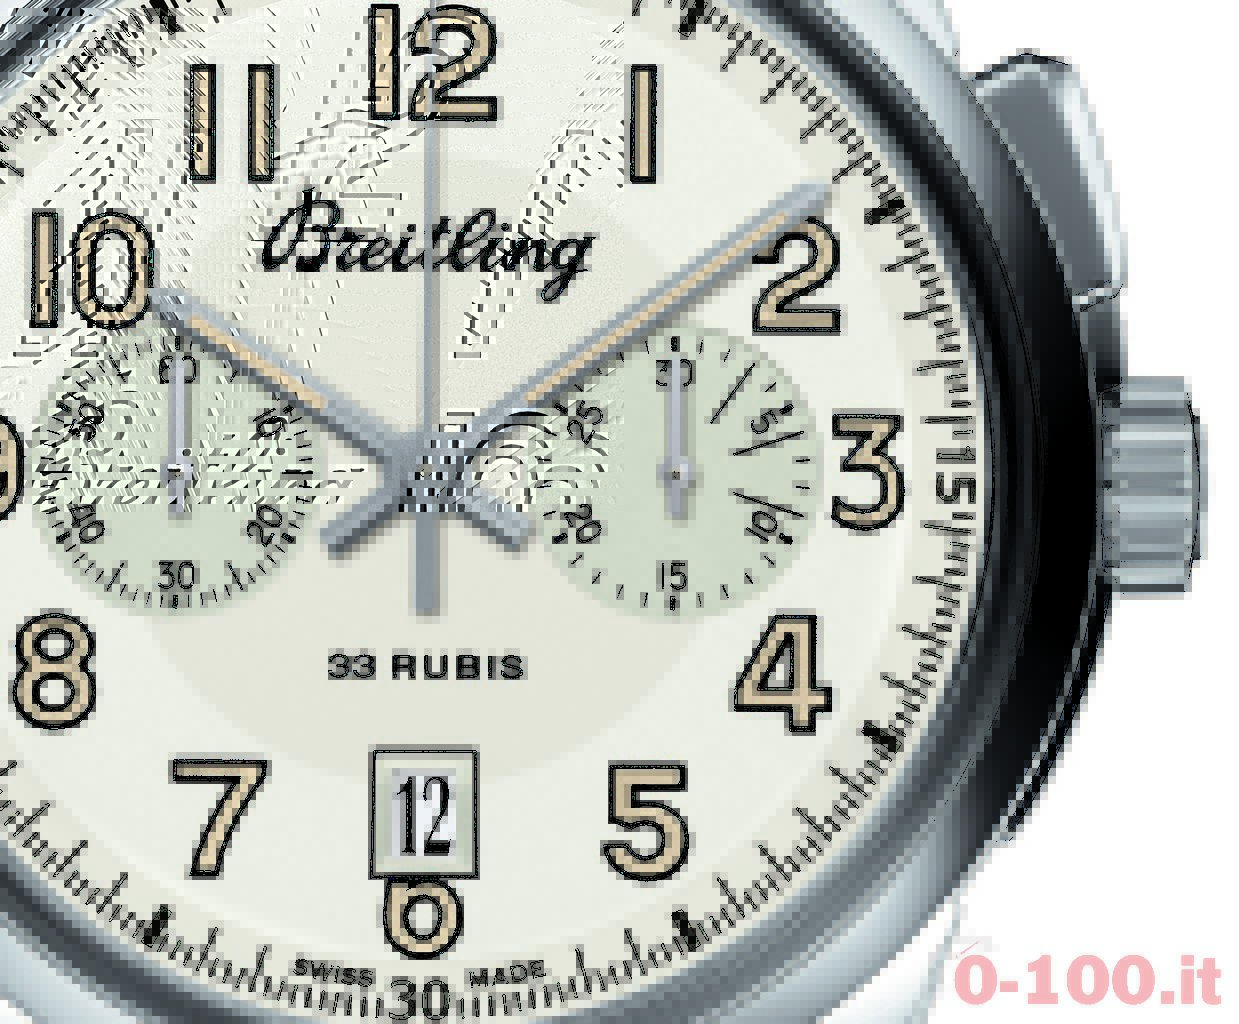 anteprima-baselworld-2015-breitling-transocean-chronograph-1915-limited-edition_0-100_2